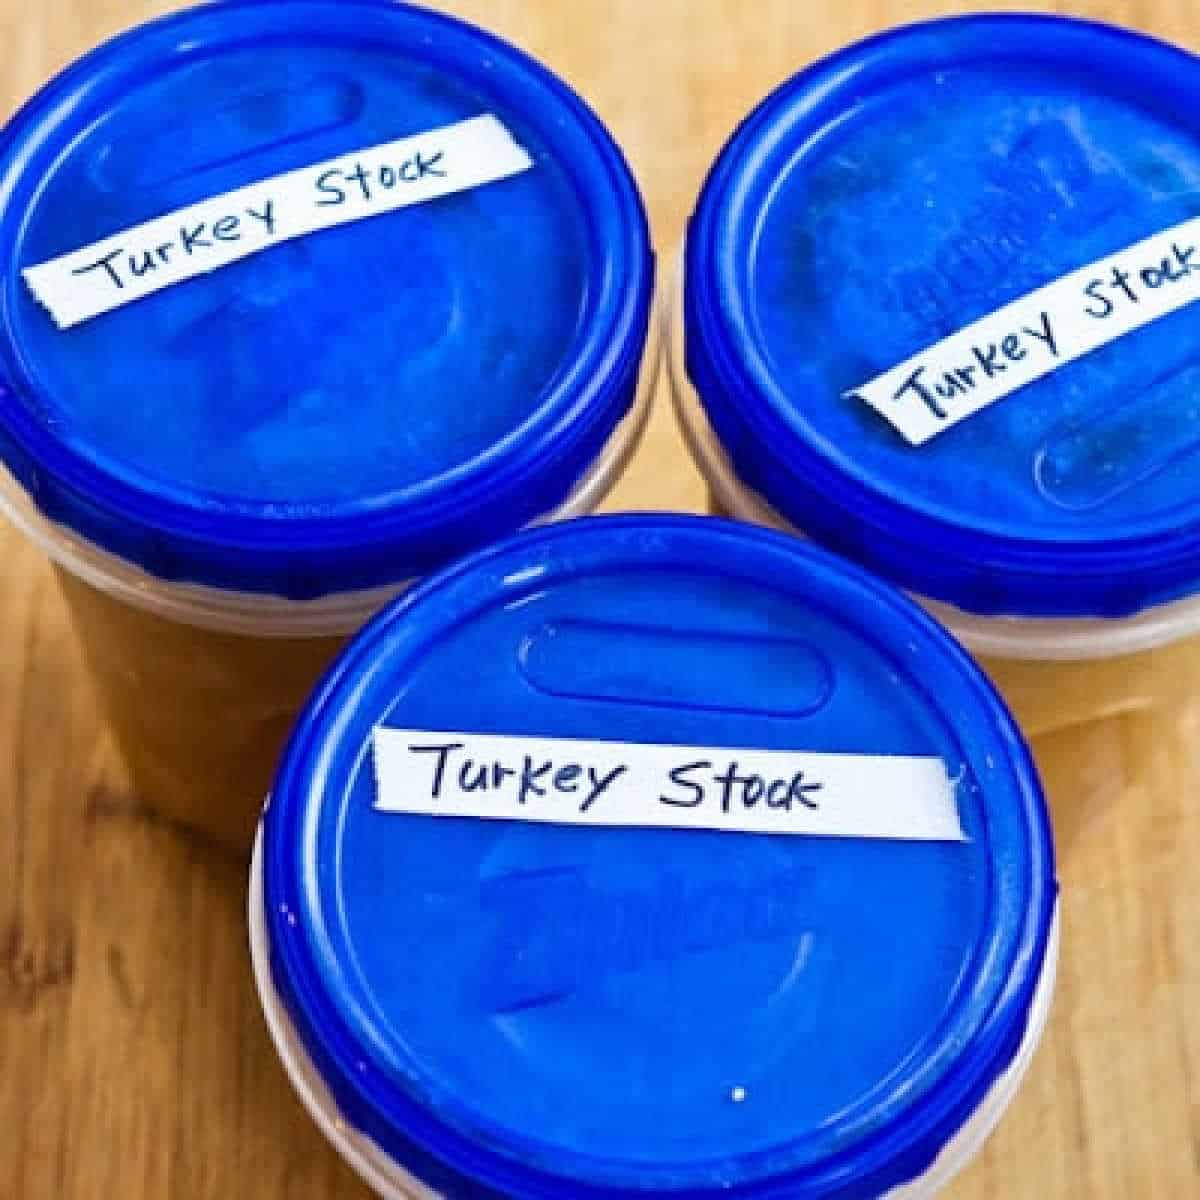 How to make turkey stock appear stock in freezer containers